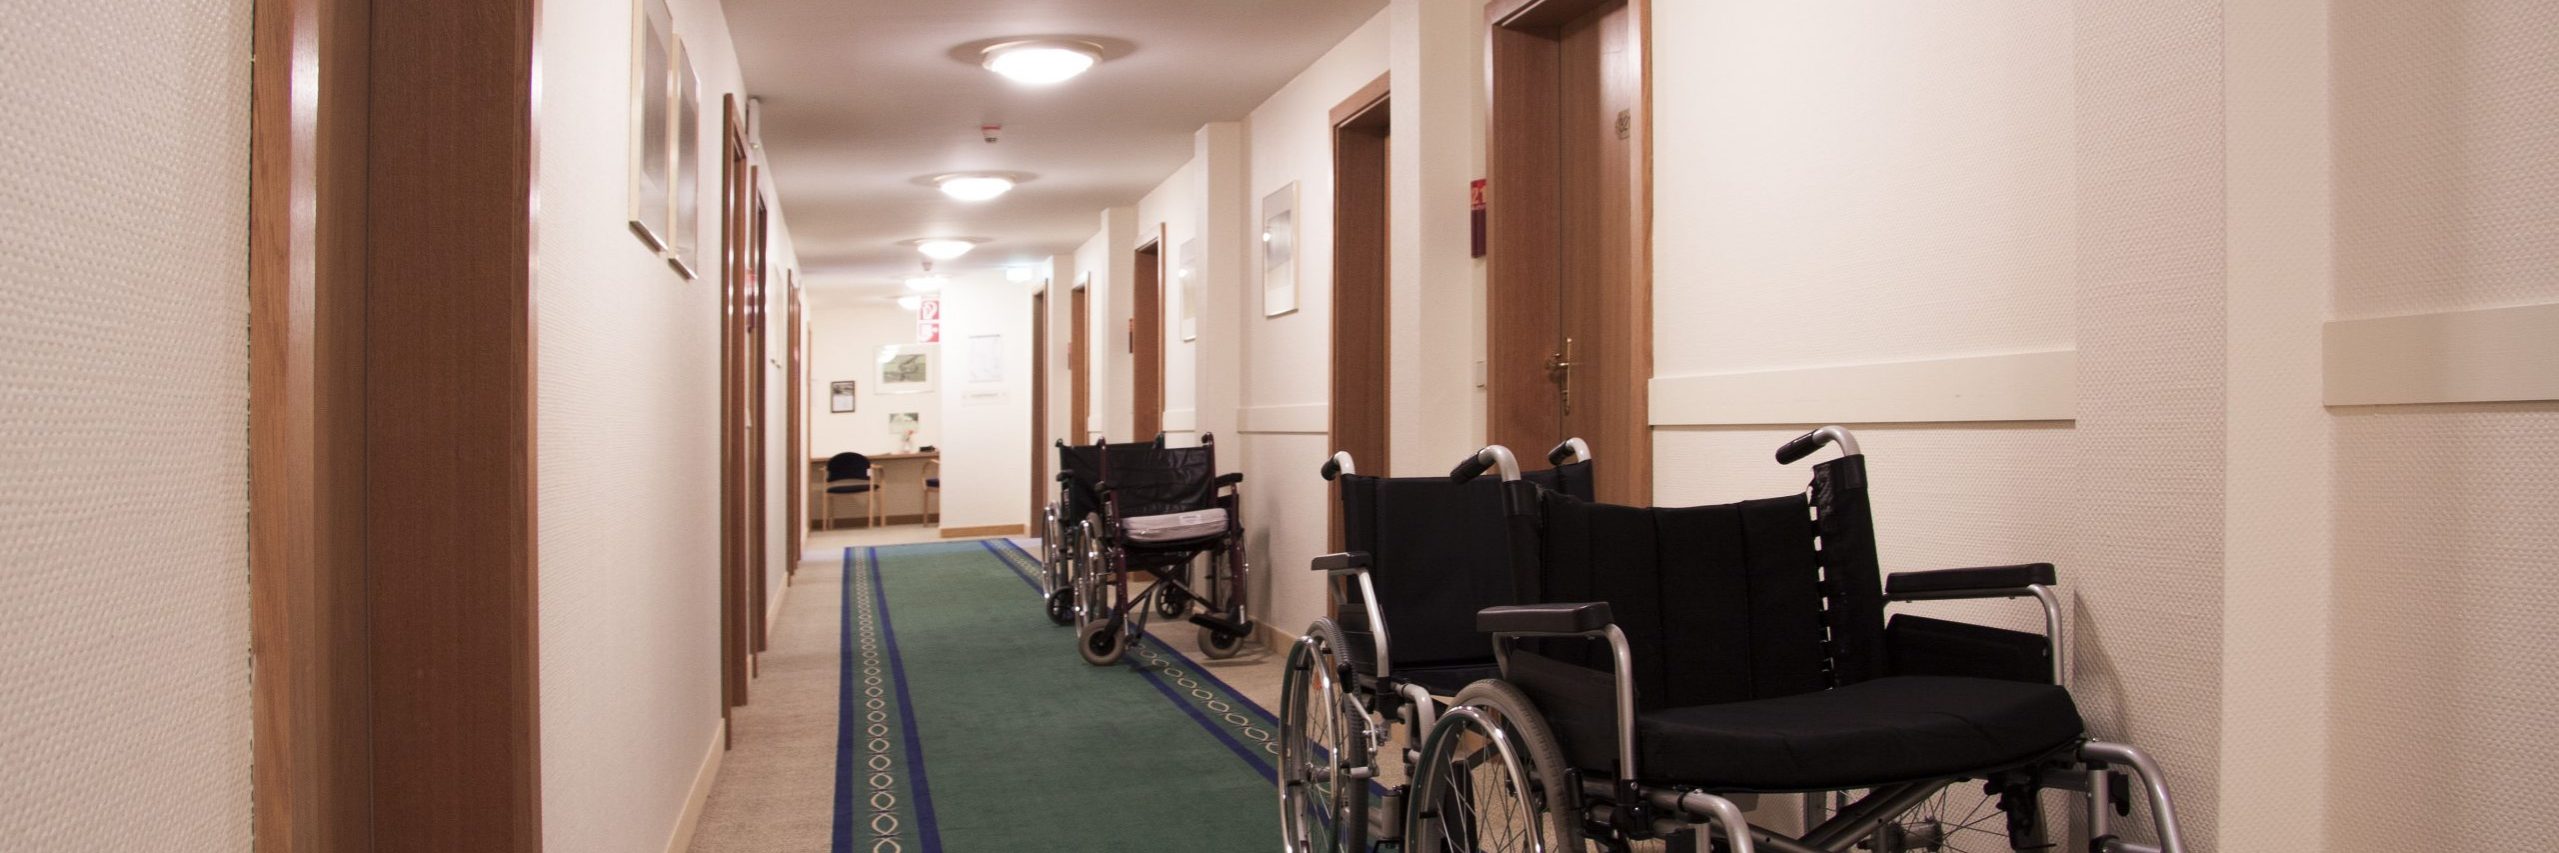 disability care home settings report details serious incidents